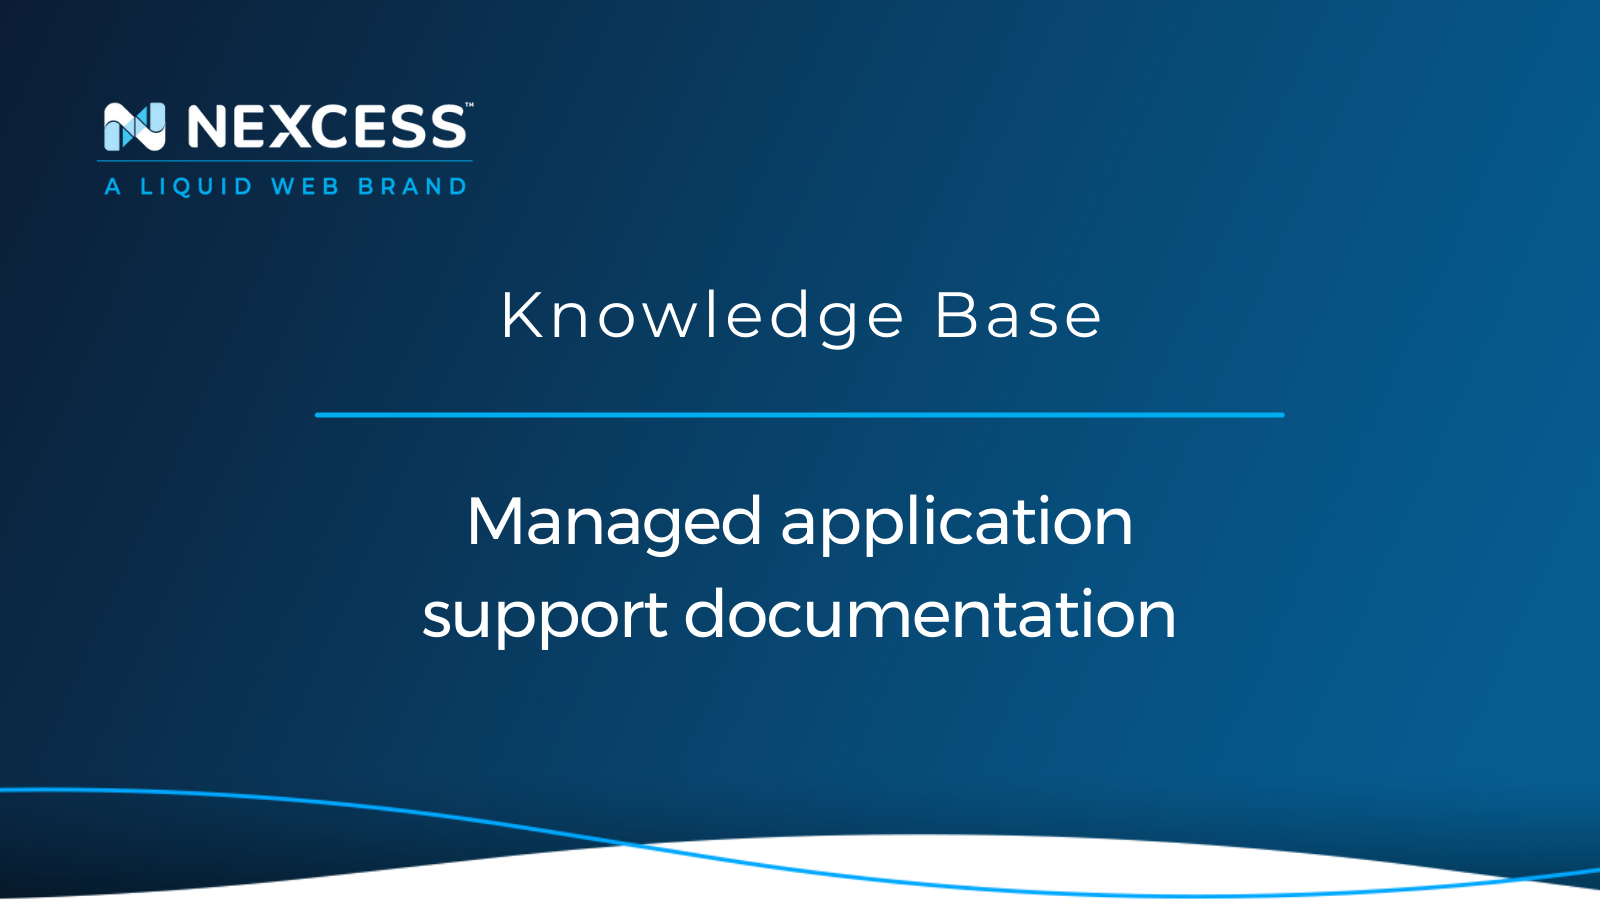 Managed application support documentation